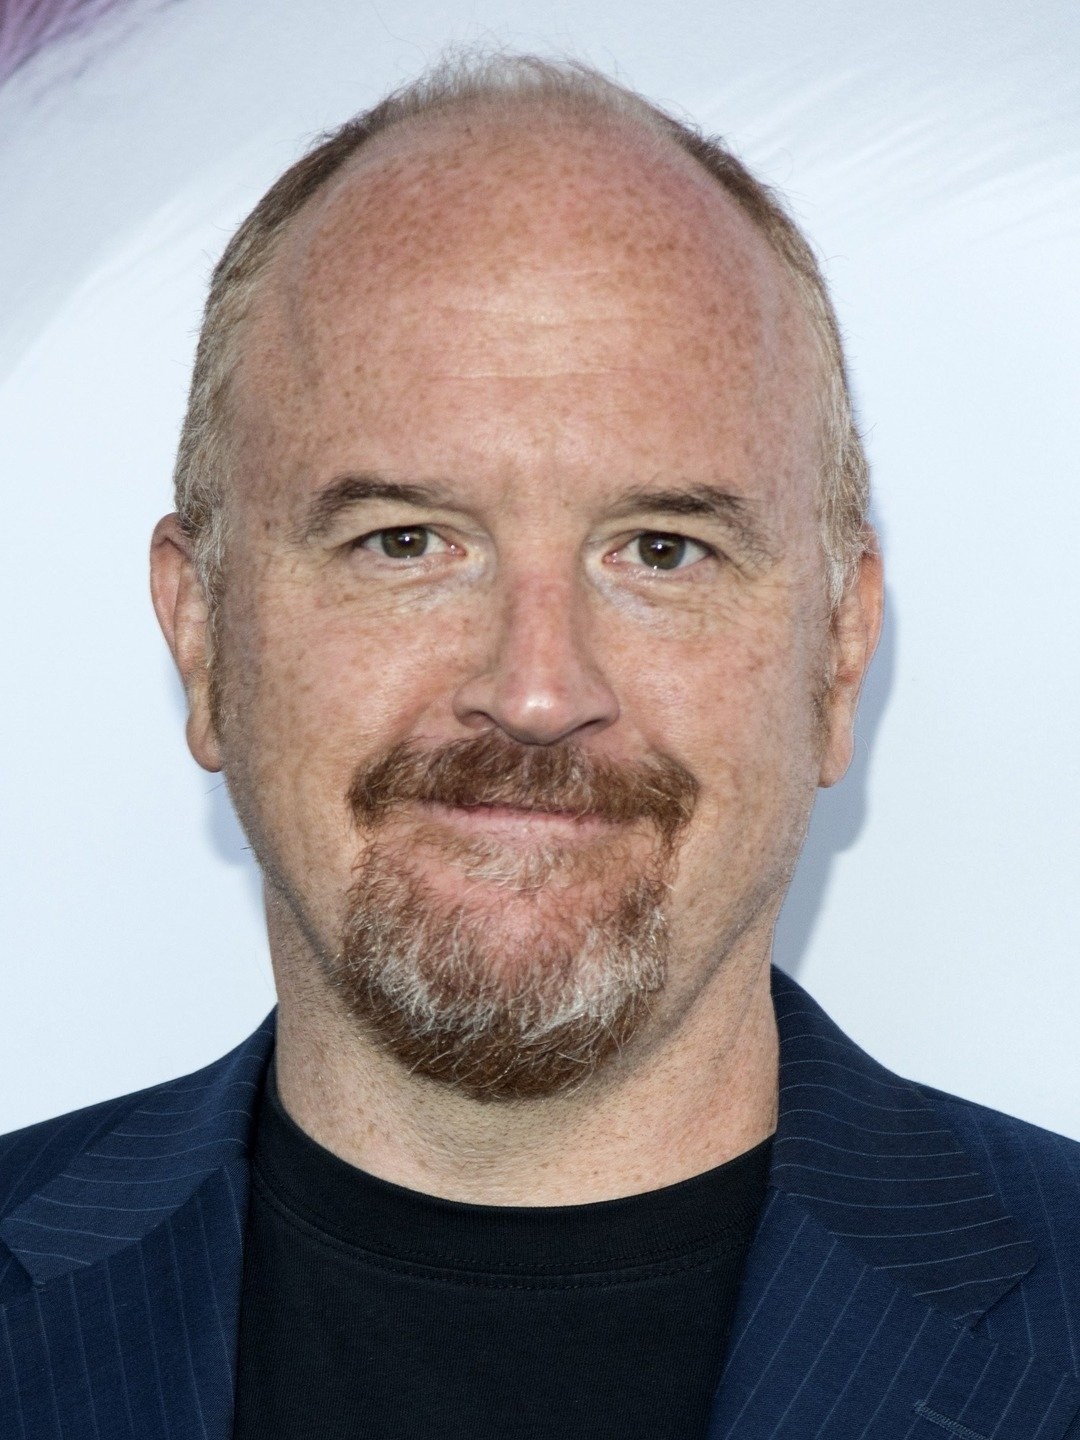 Louis C.K.: Live at the Beacon Theater (TV Special 2011) - IMDb